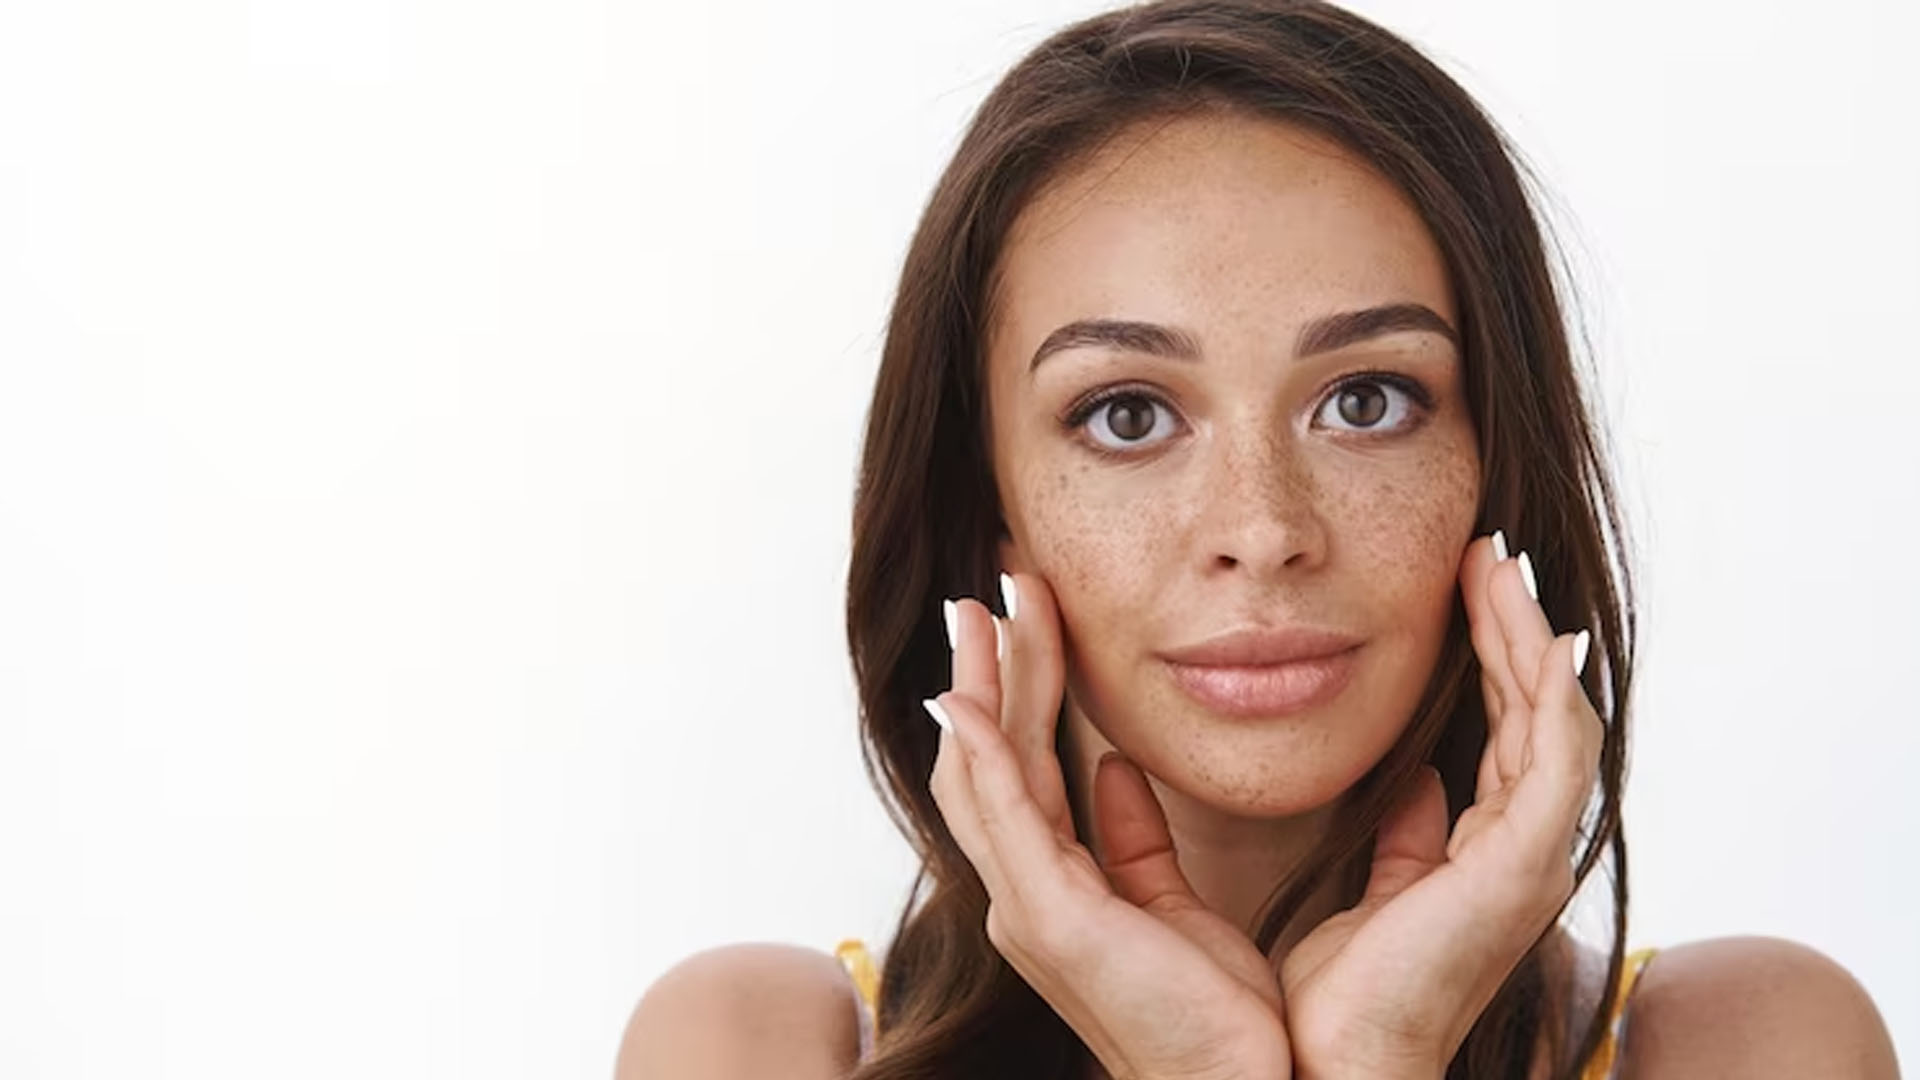 What are the Home Remedies to help with Hyperpigmentation?